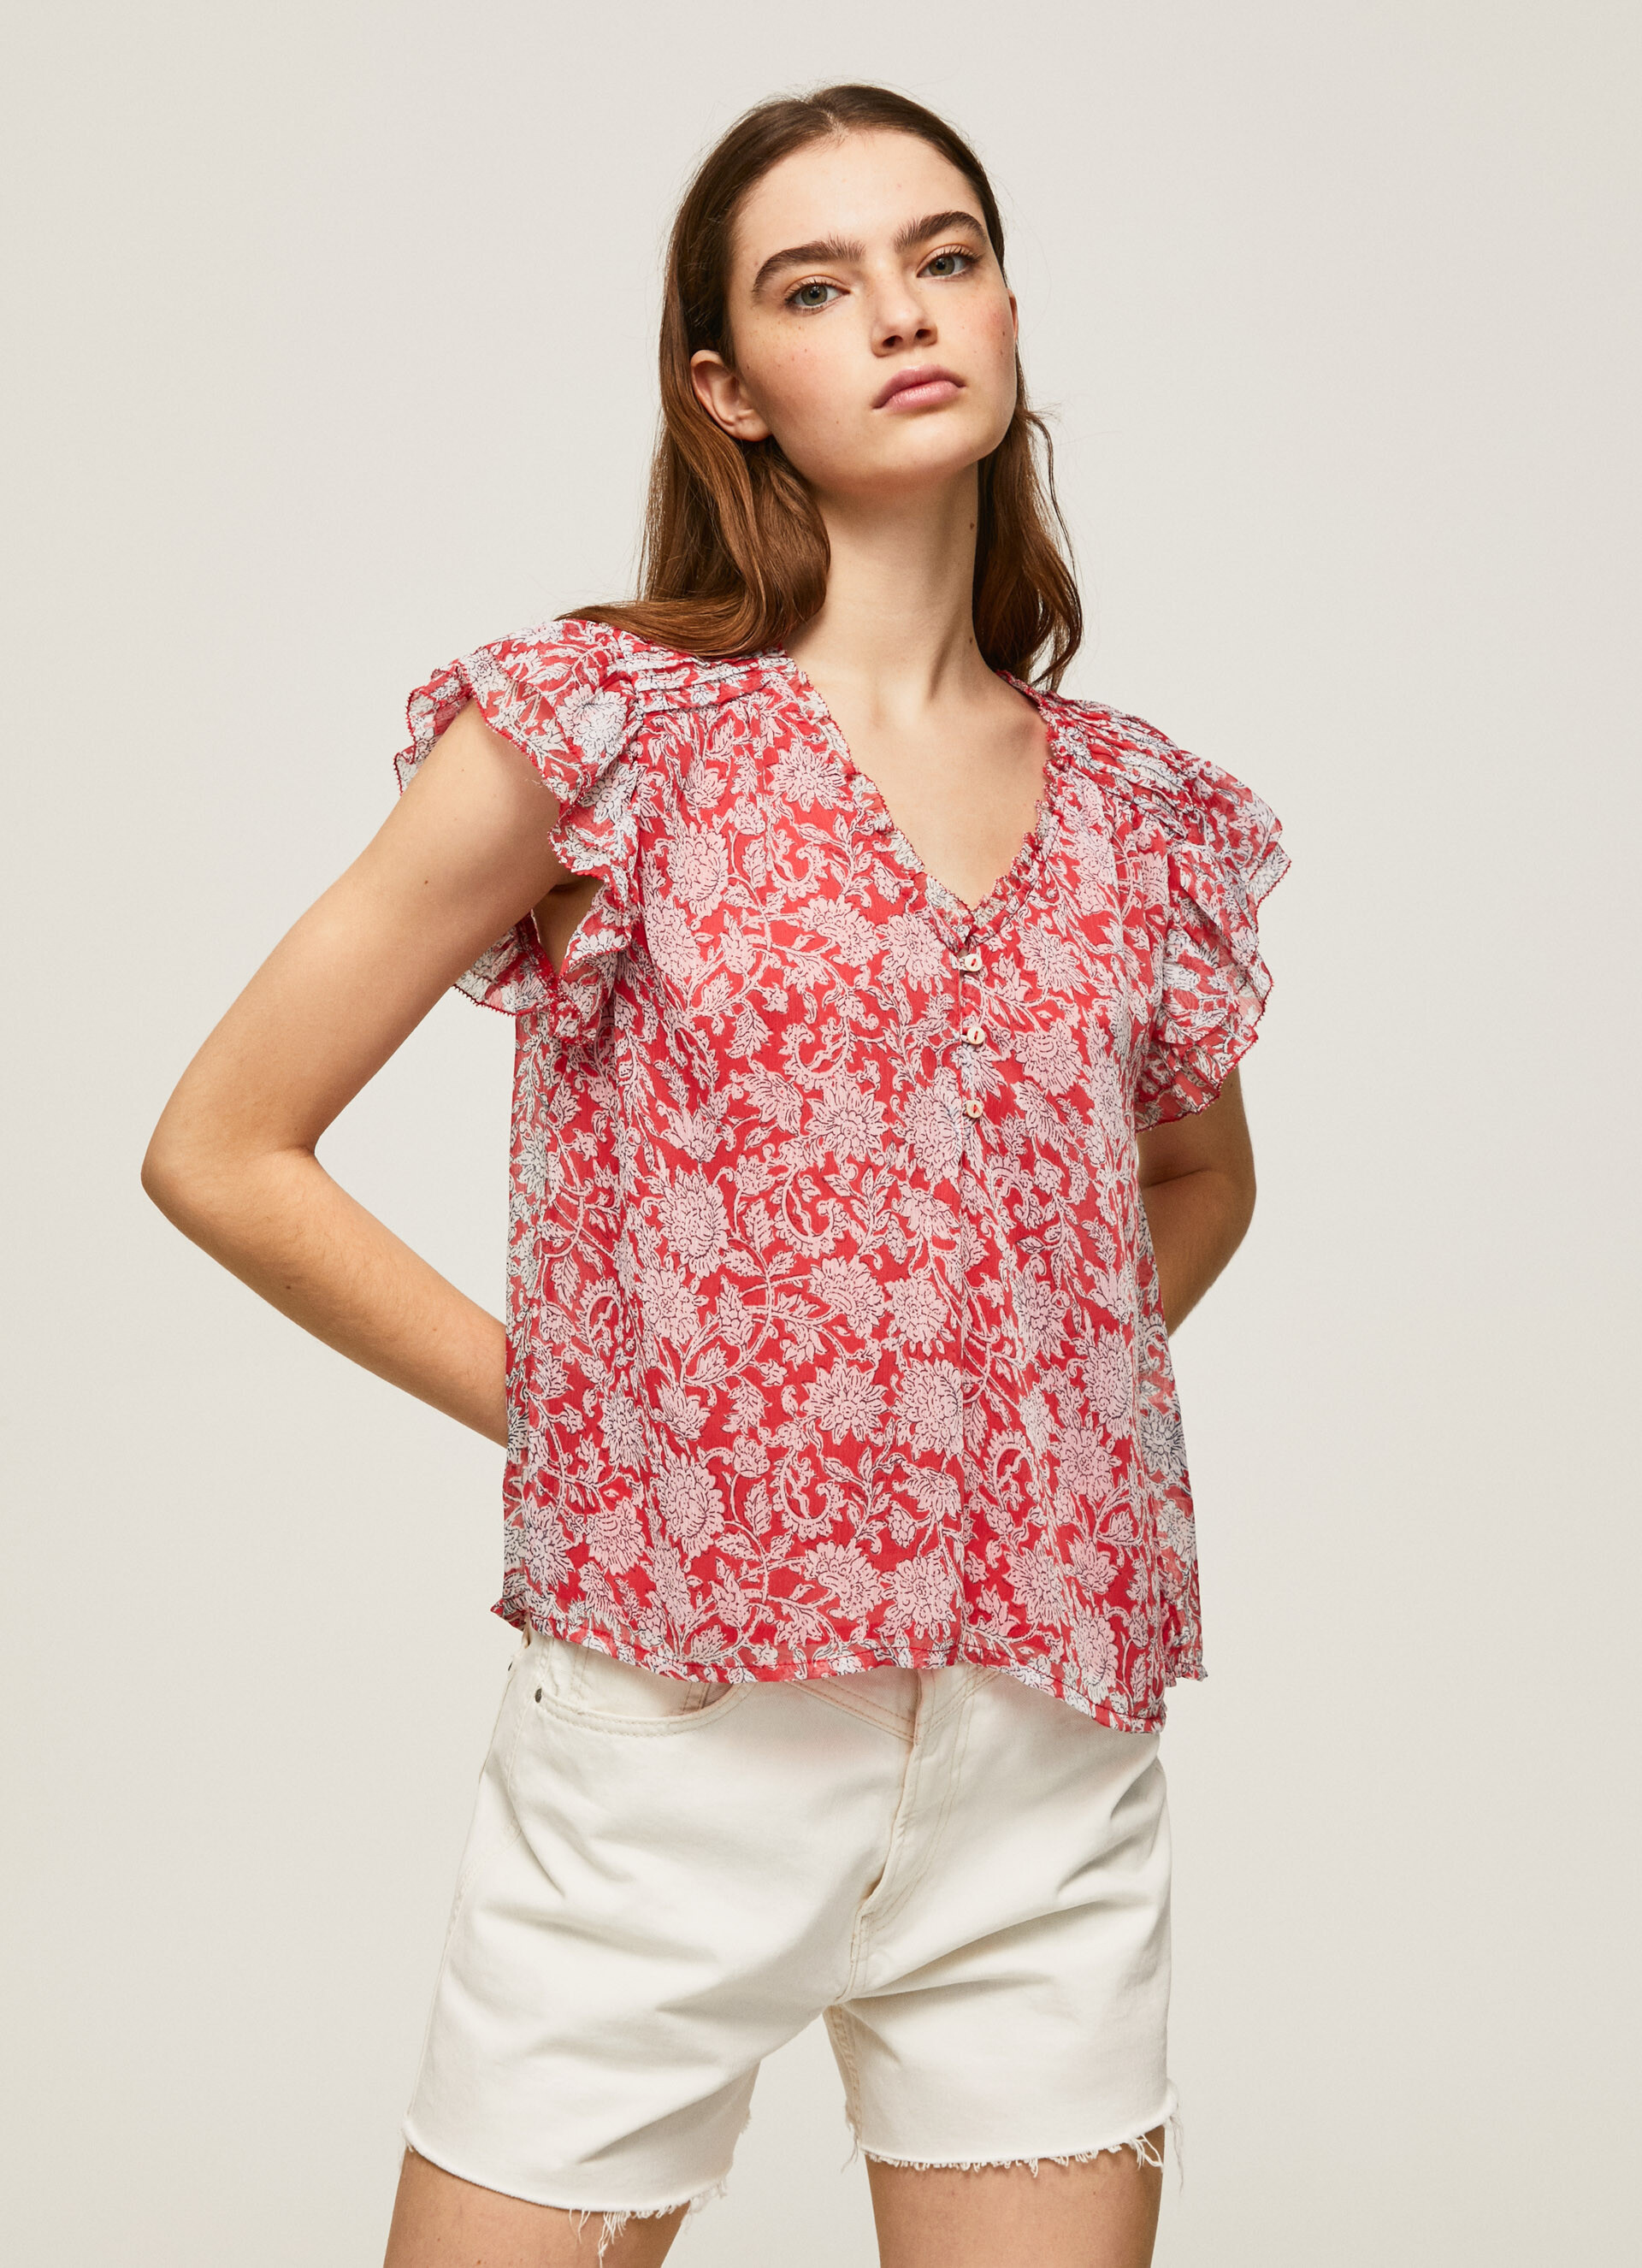 Pepe Jeans - Patterned top, Red, large image number 3